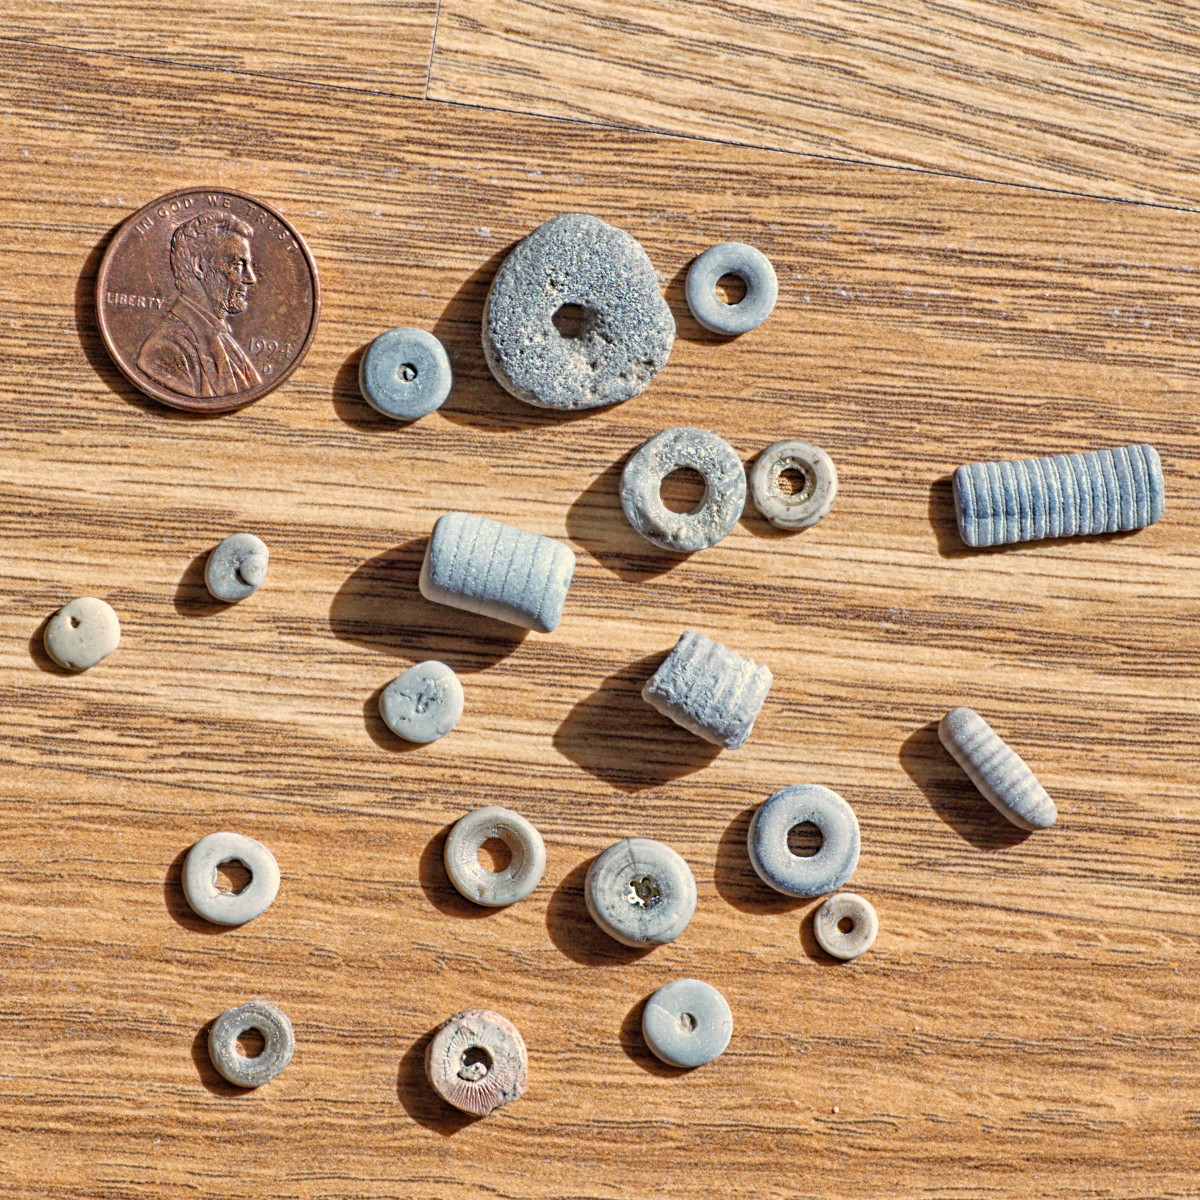 Crinoid Fossil Stems and Individual Pieces Found on Lake Michigan Beach